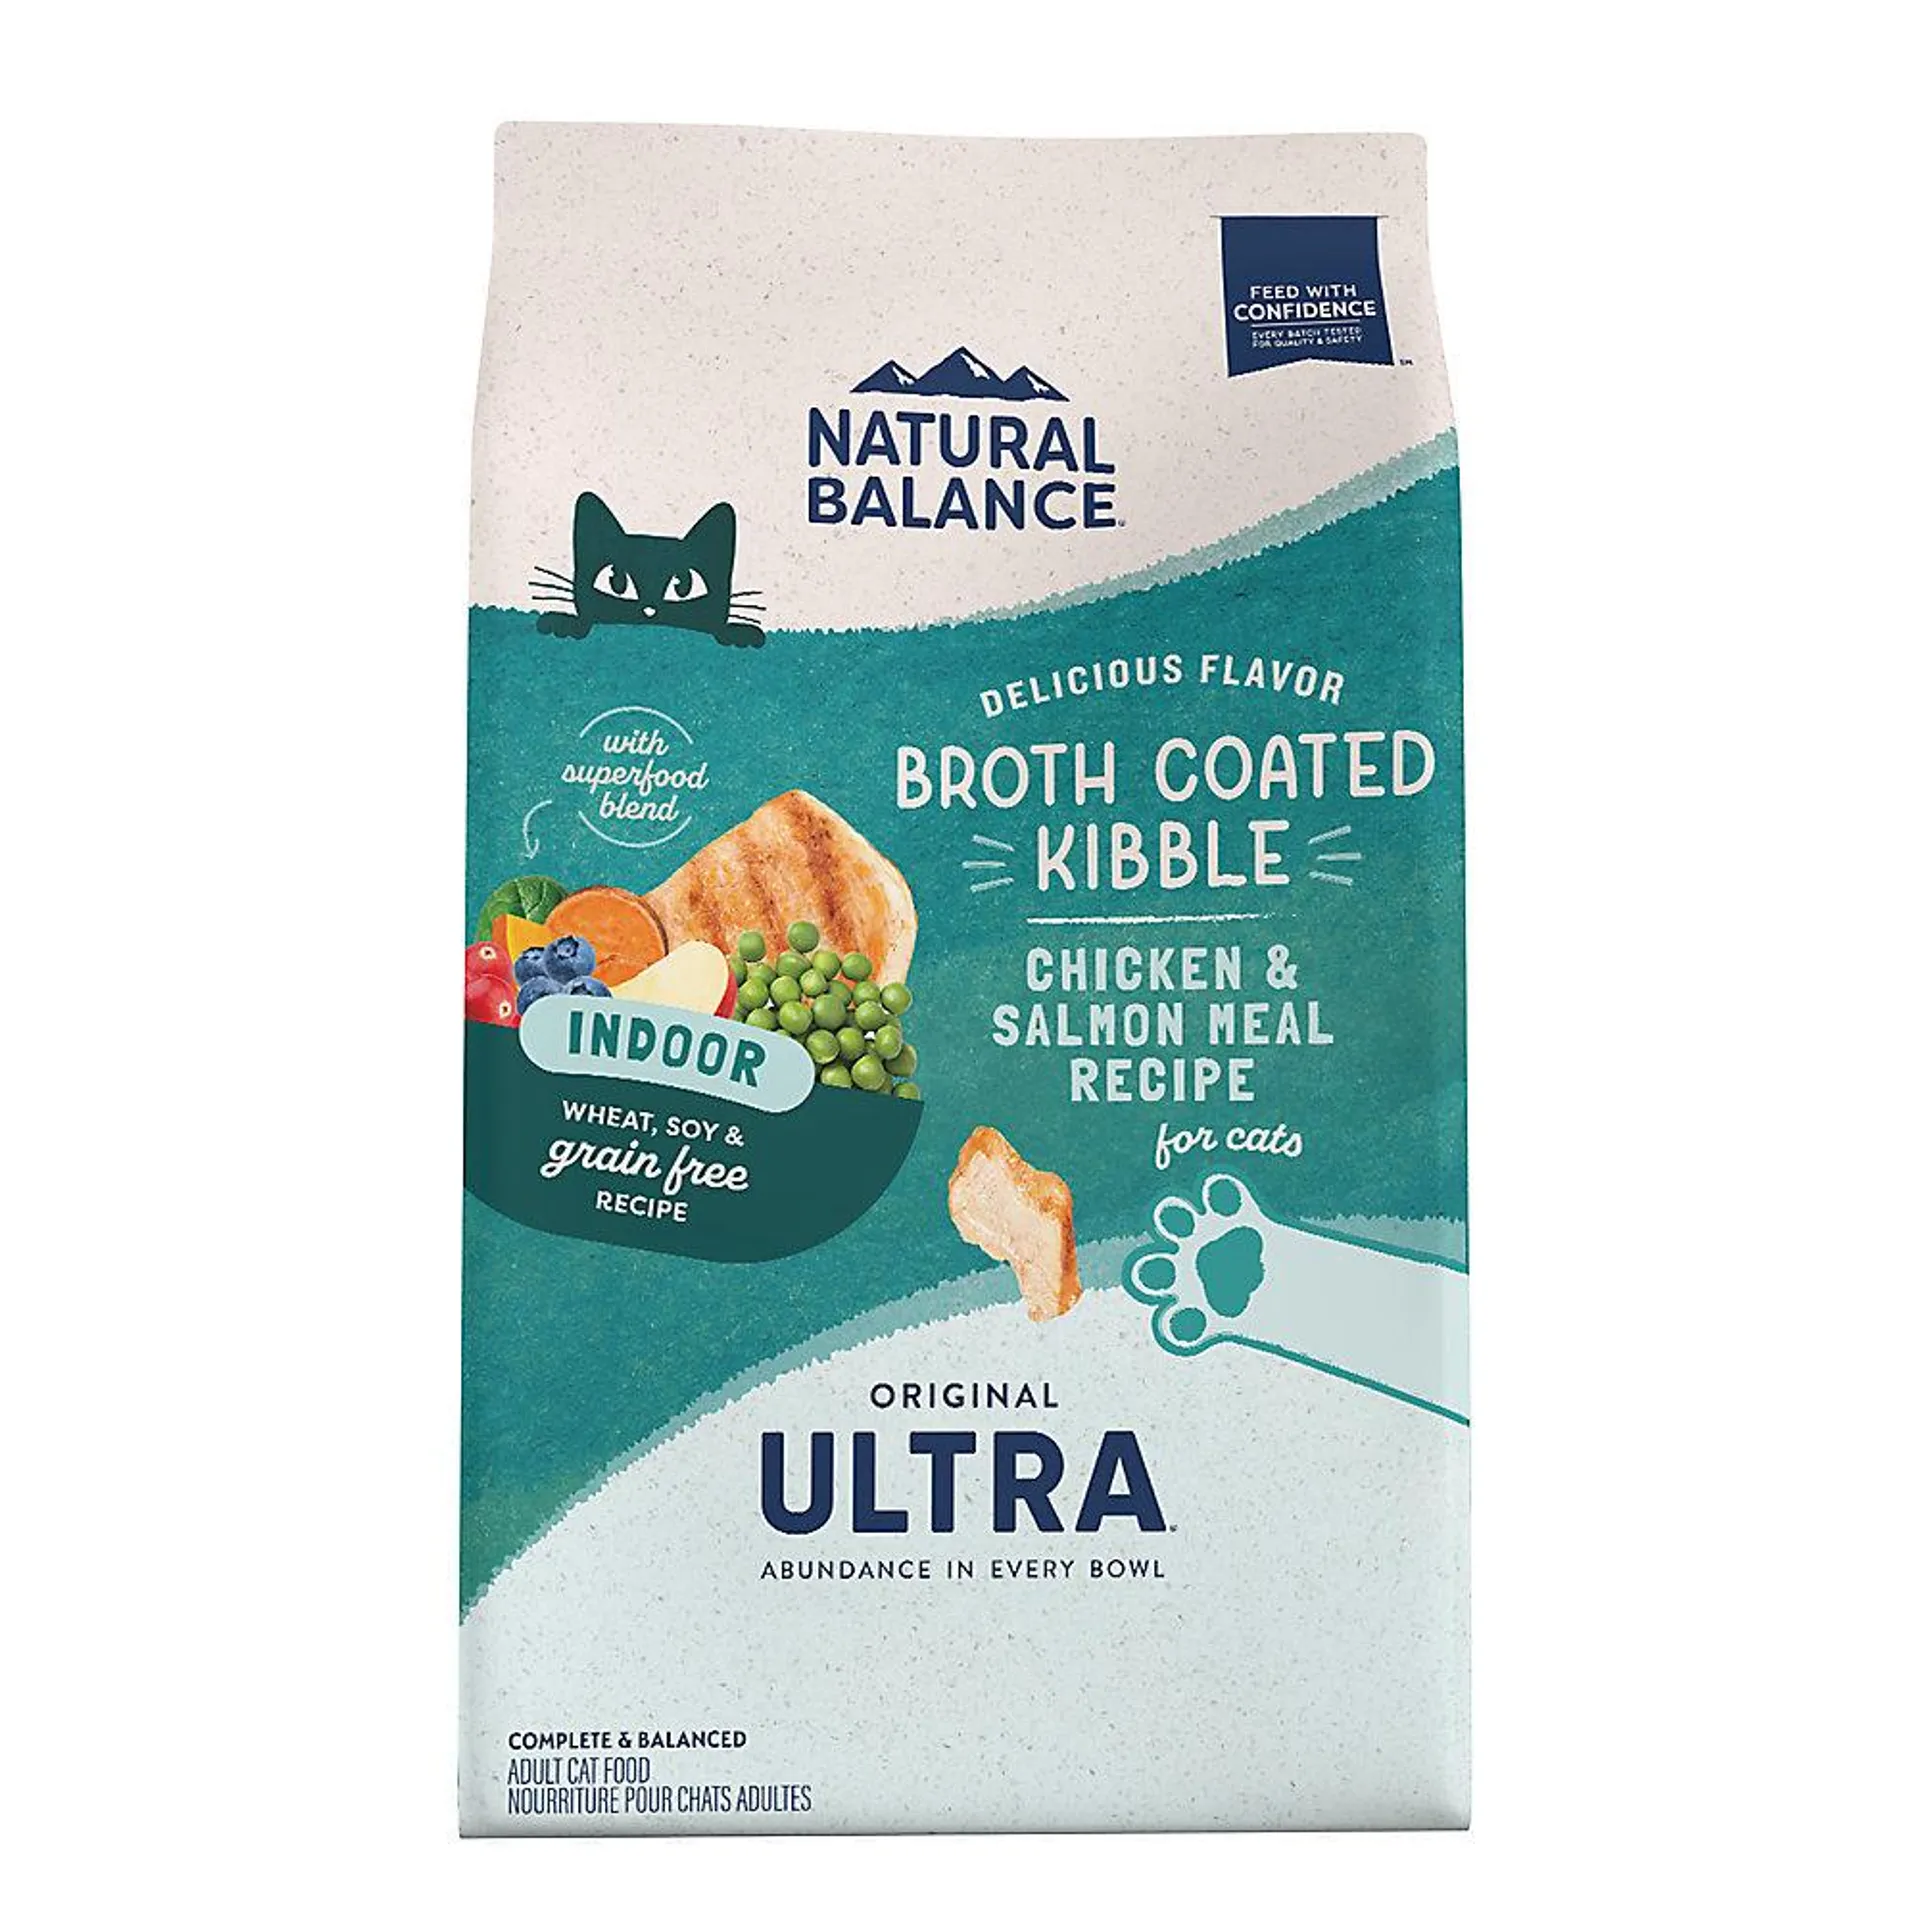 Natural Balance Indoor Adult Cat Broth Coated Kibble - Wheat, Soy & Grain Free, Chicken & Salmon